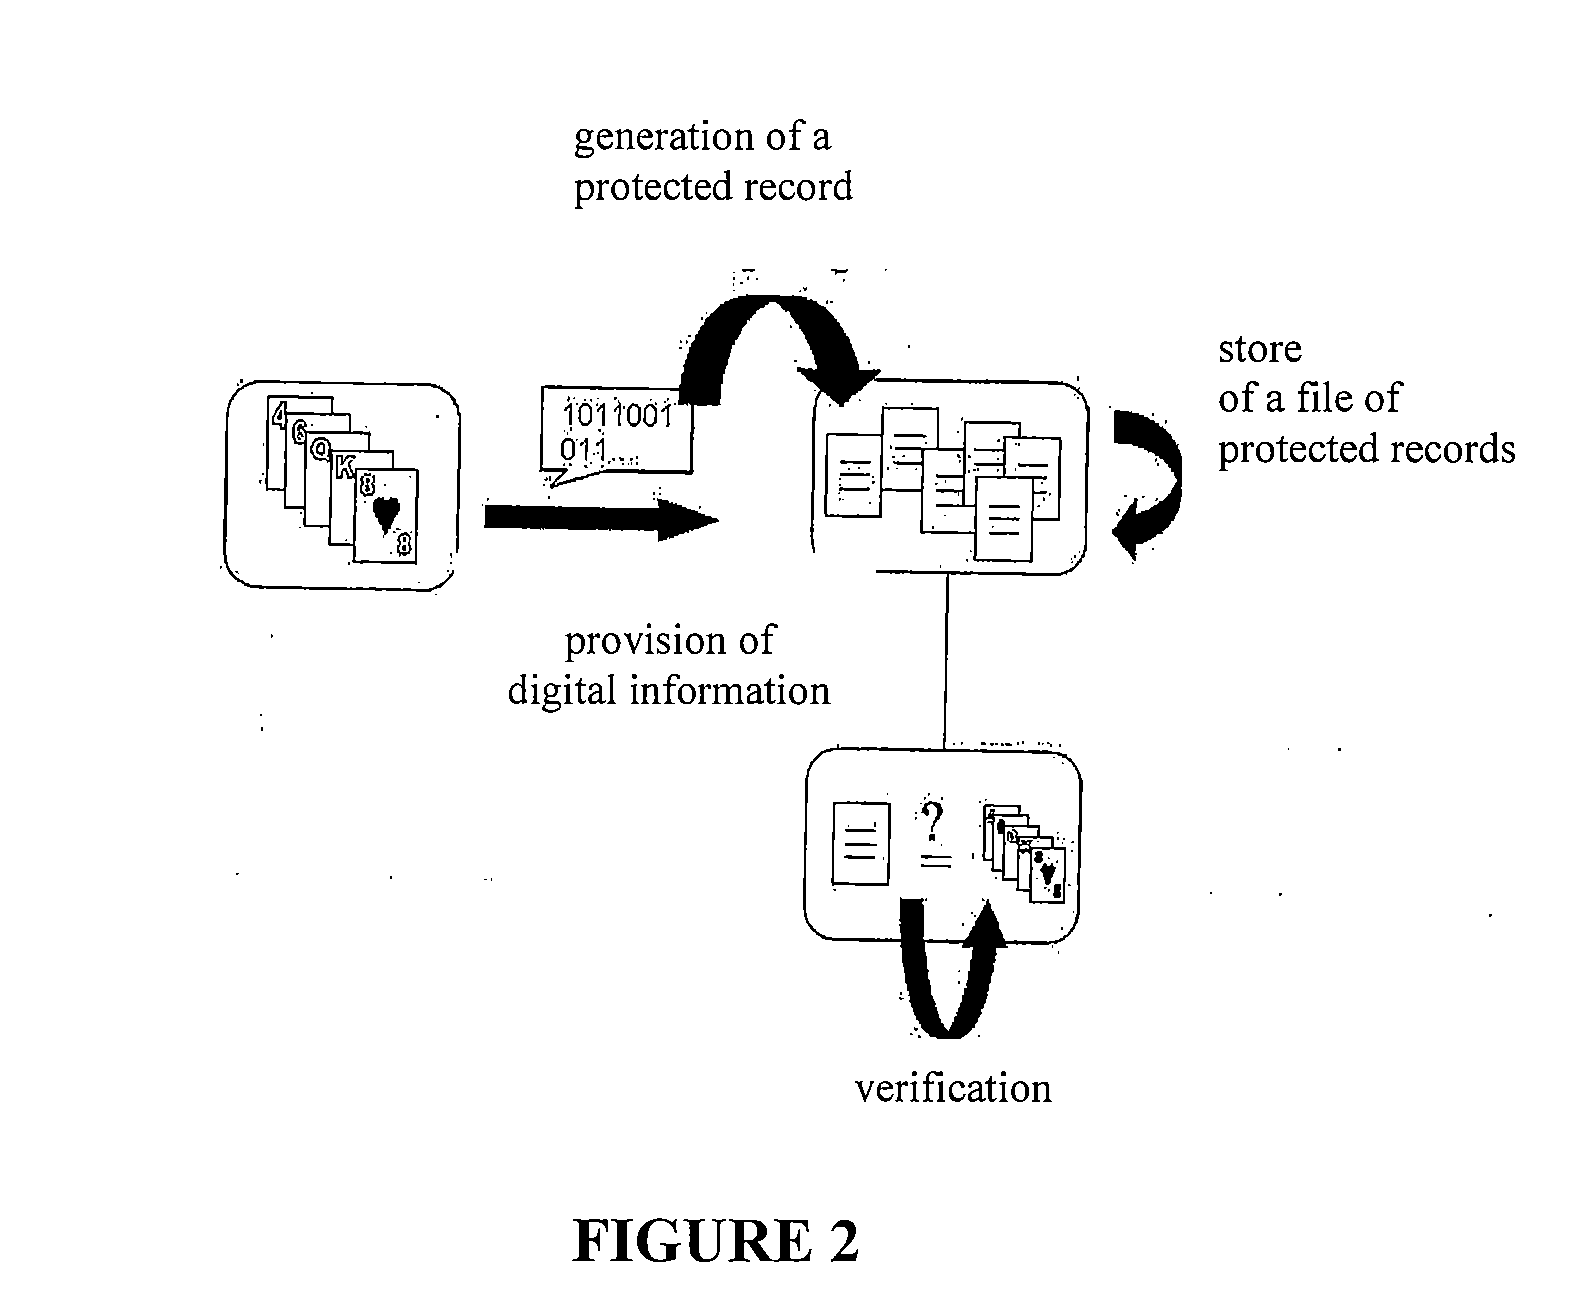 Method and System For the Generation of a File of Auditable Records For Remote and On-Site Electronic Gaming